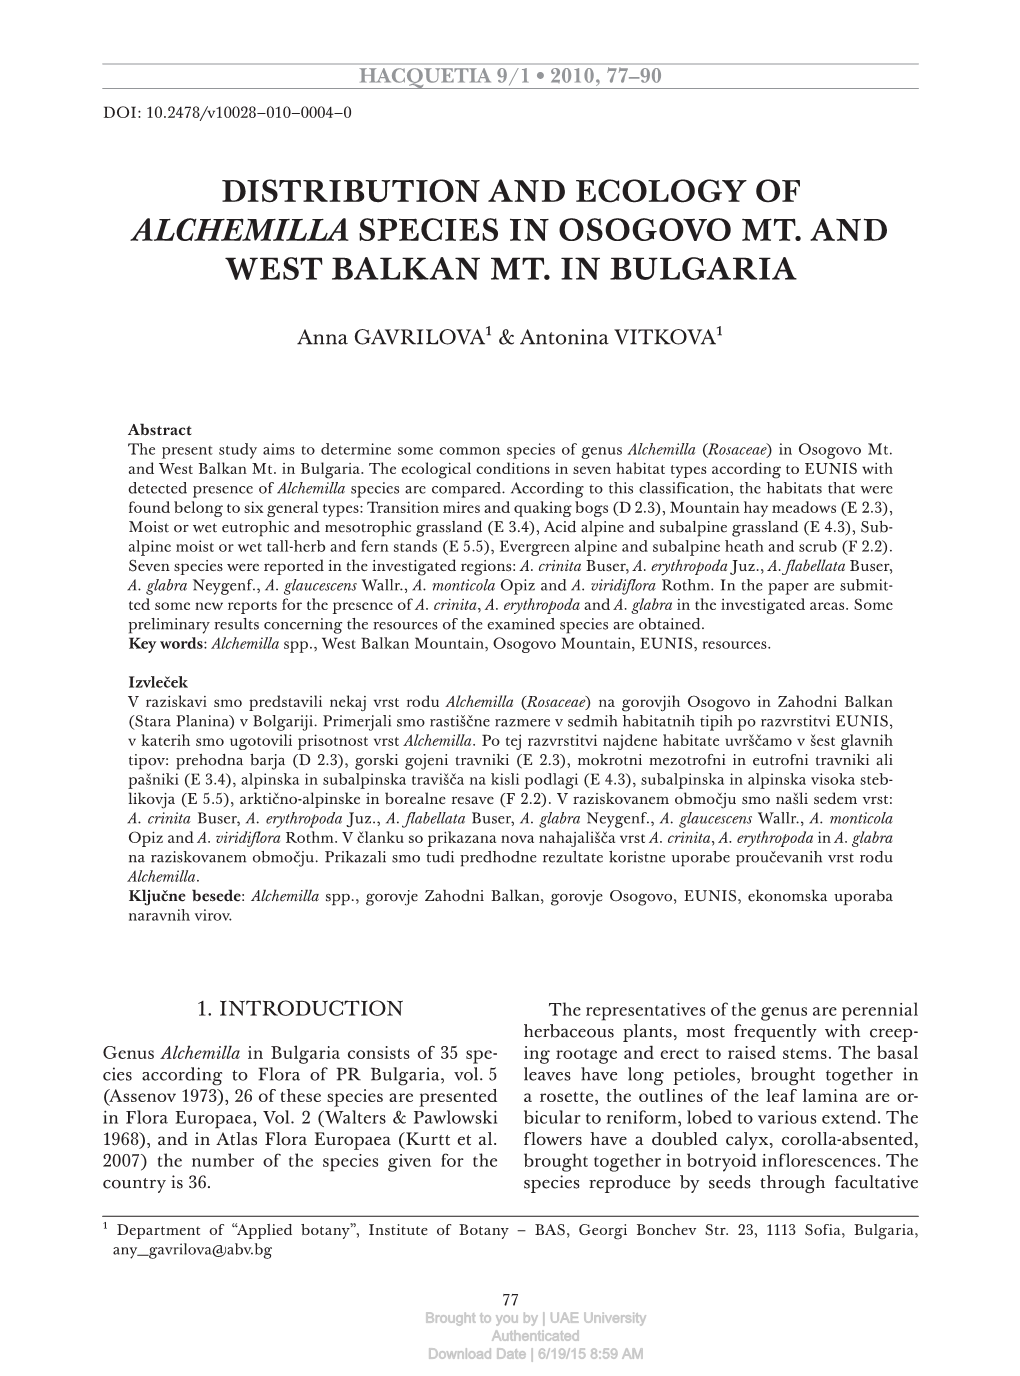 Distribution and Ecology of Alchemilla Species in Osogovo Mt. and West Balkan Mt. in Bulgaria